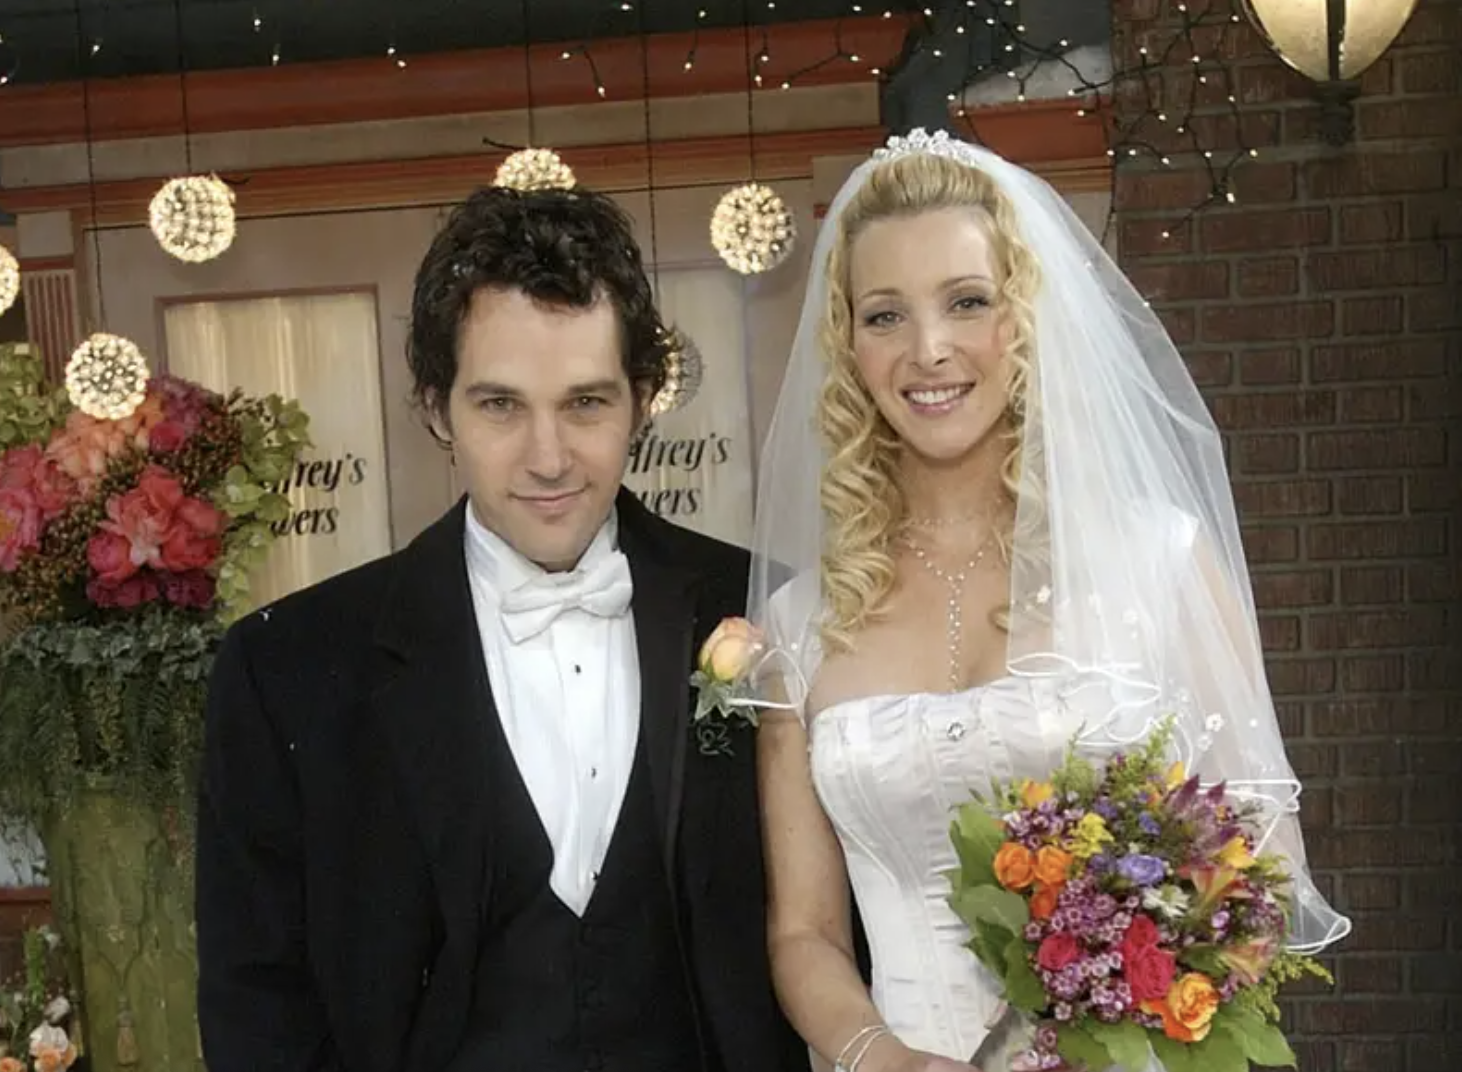 paul rudd and lisa kudrow stand next to each other in wedding attire